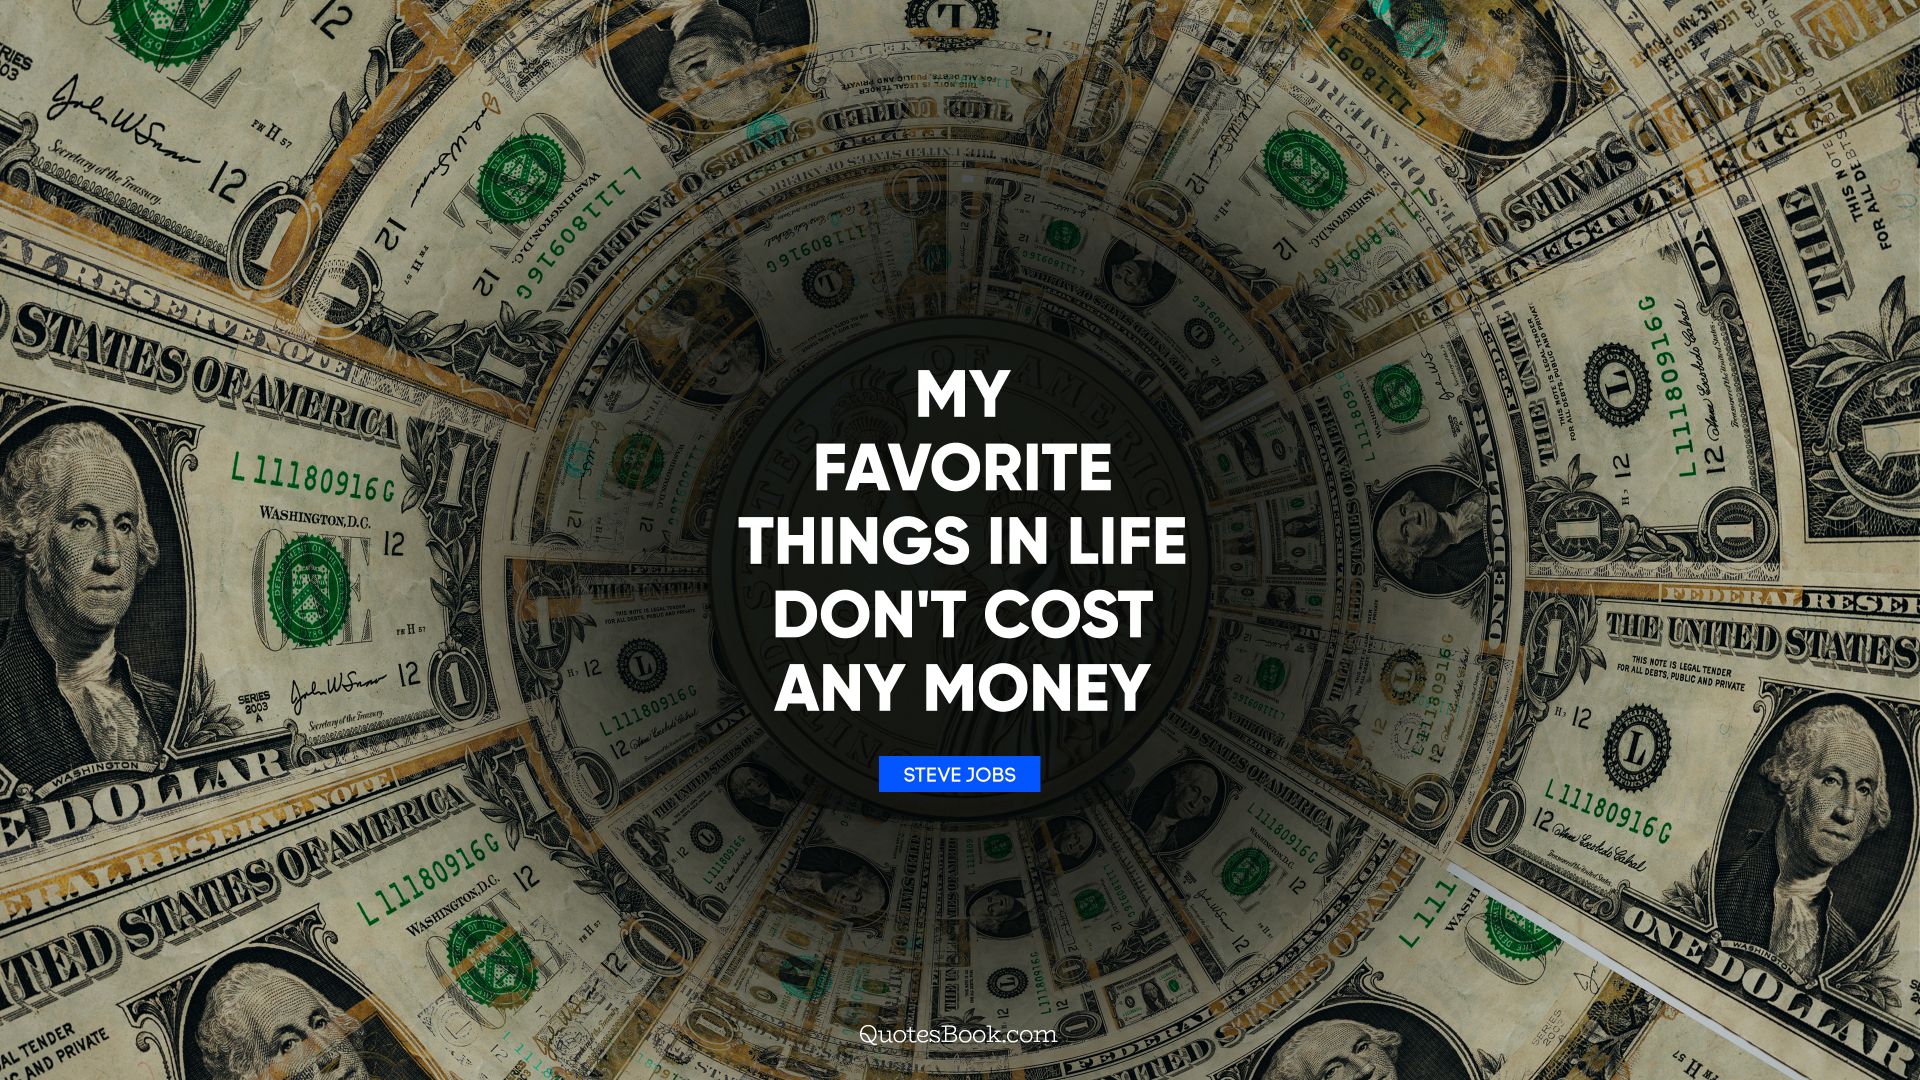 My favorite things in life don't cost any money. - Quote by Steve Jobs